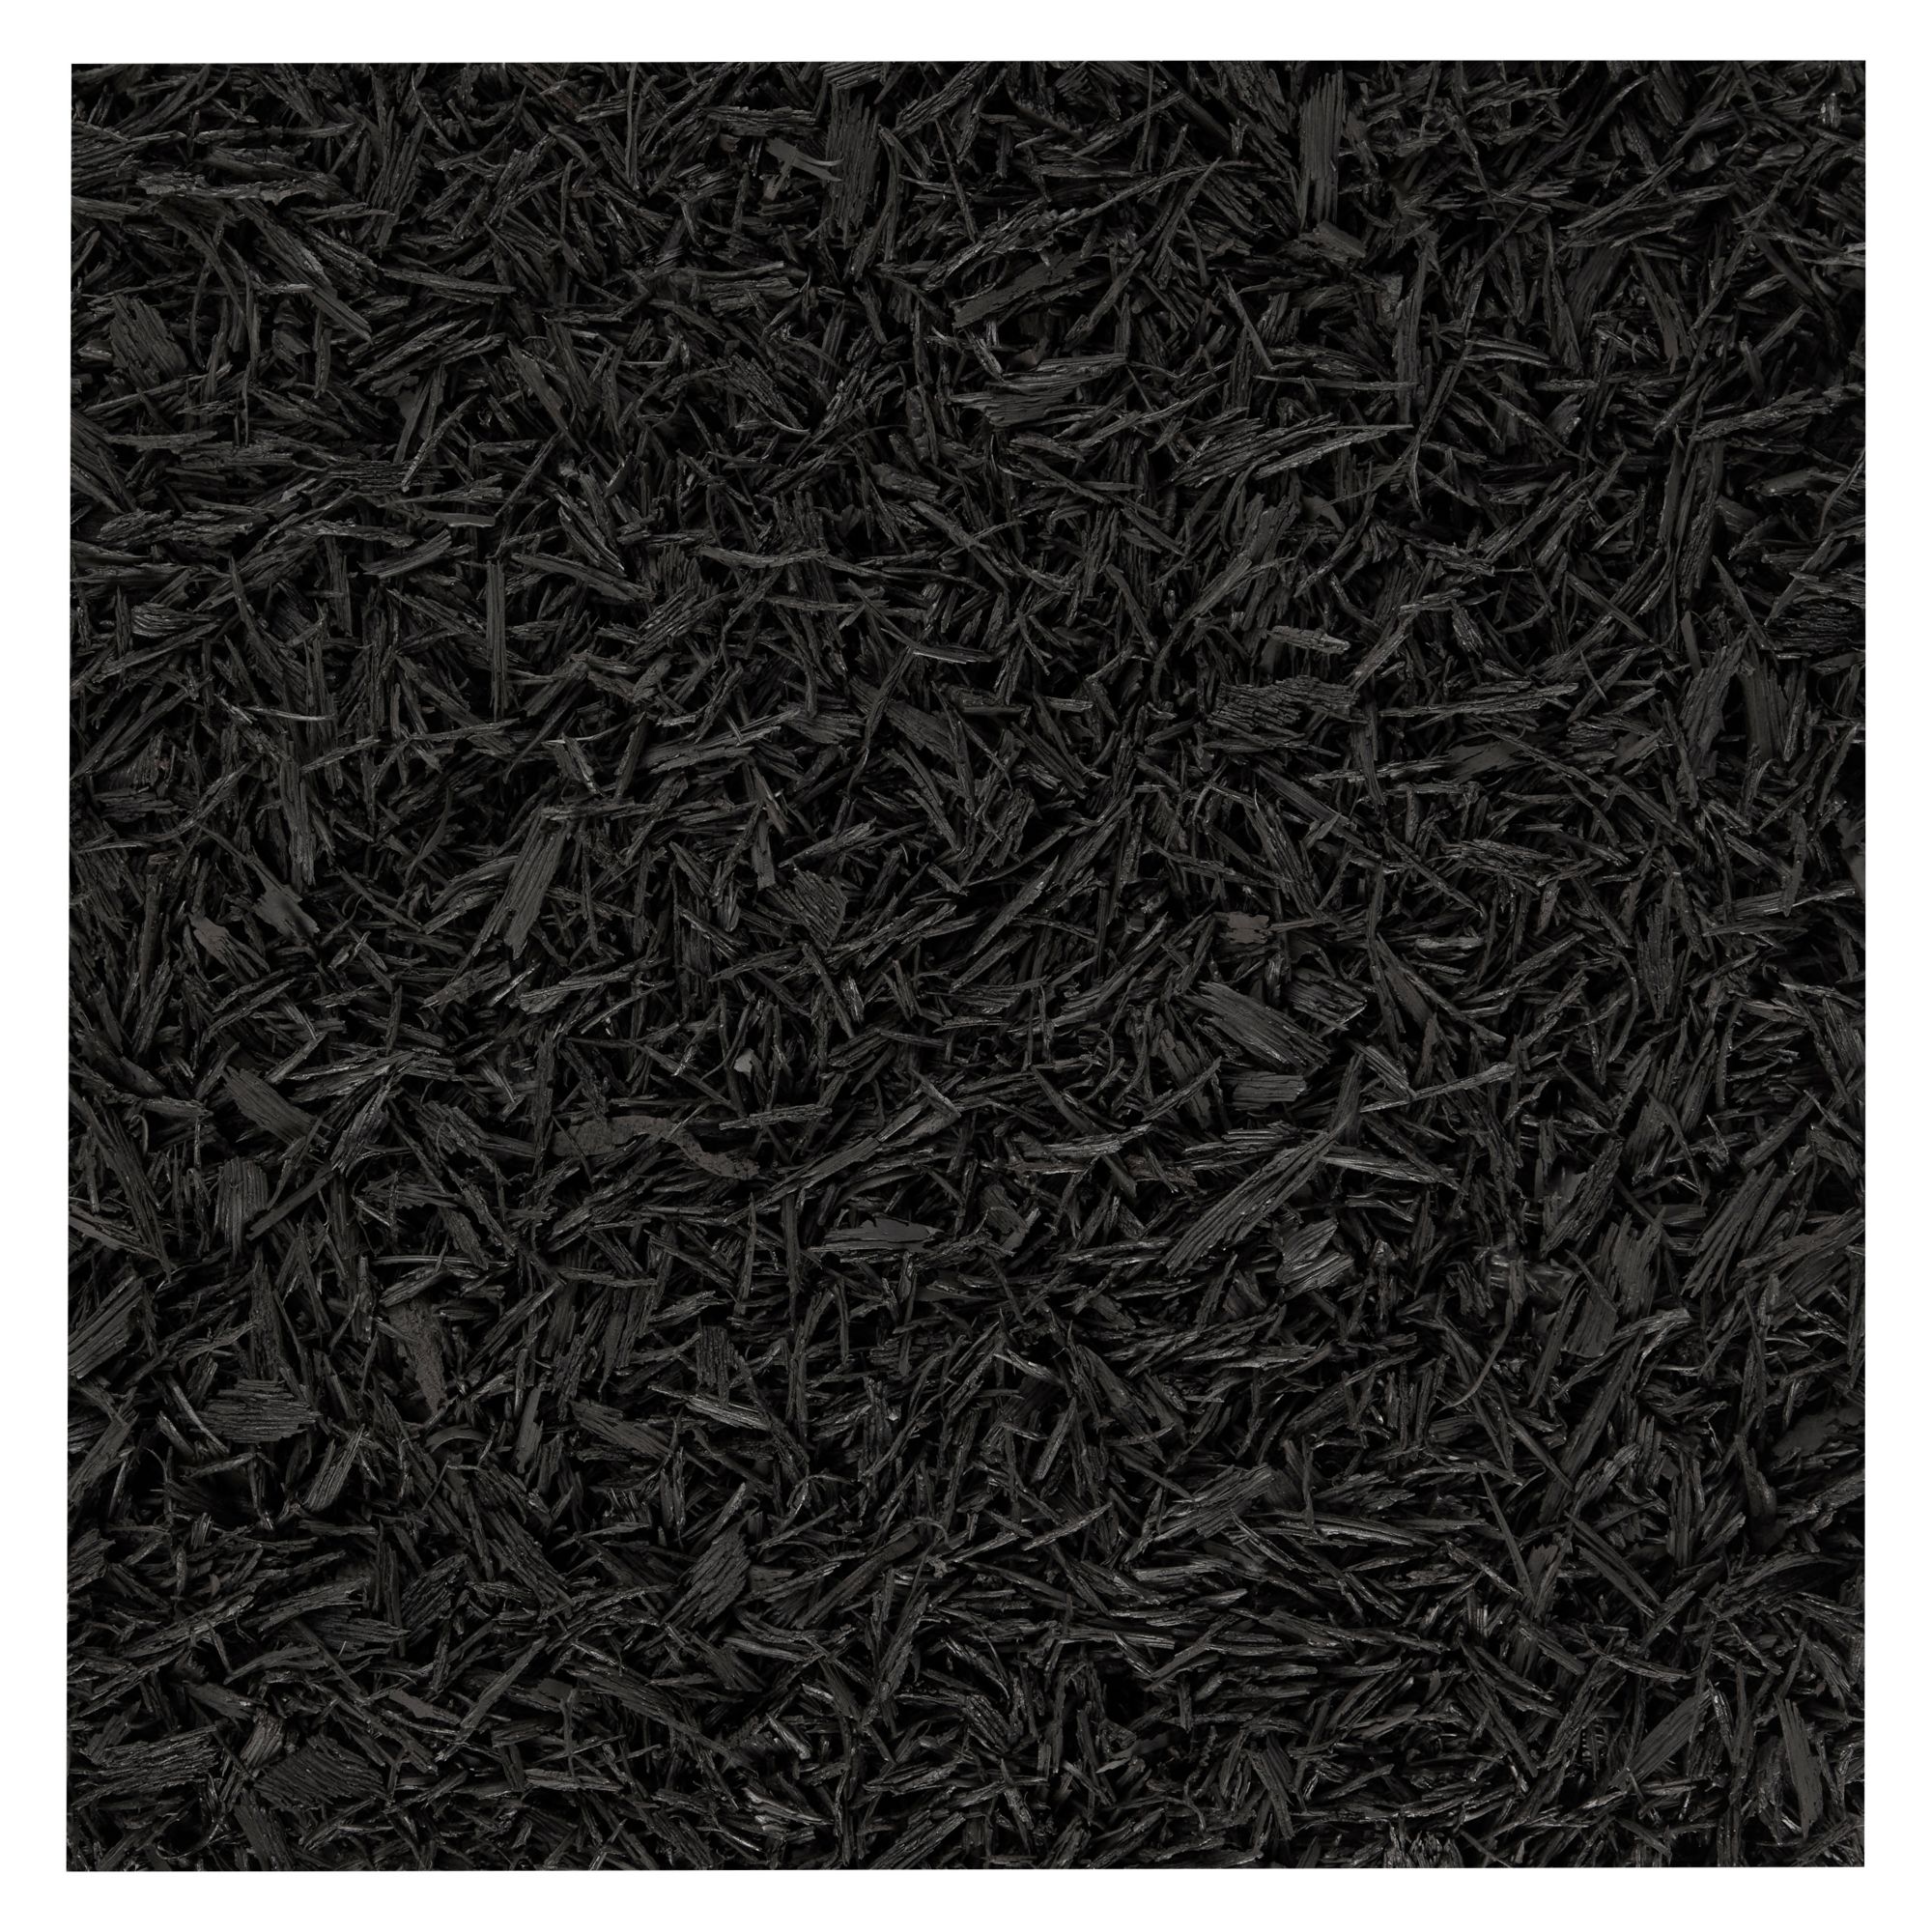 100% Recycled NuScape Rubber Mulch Bags | BJ's Wholesale Club